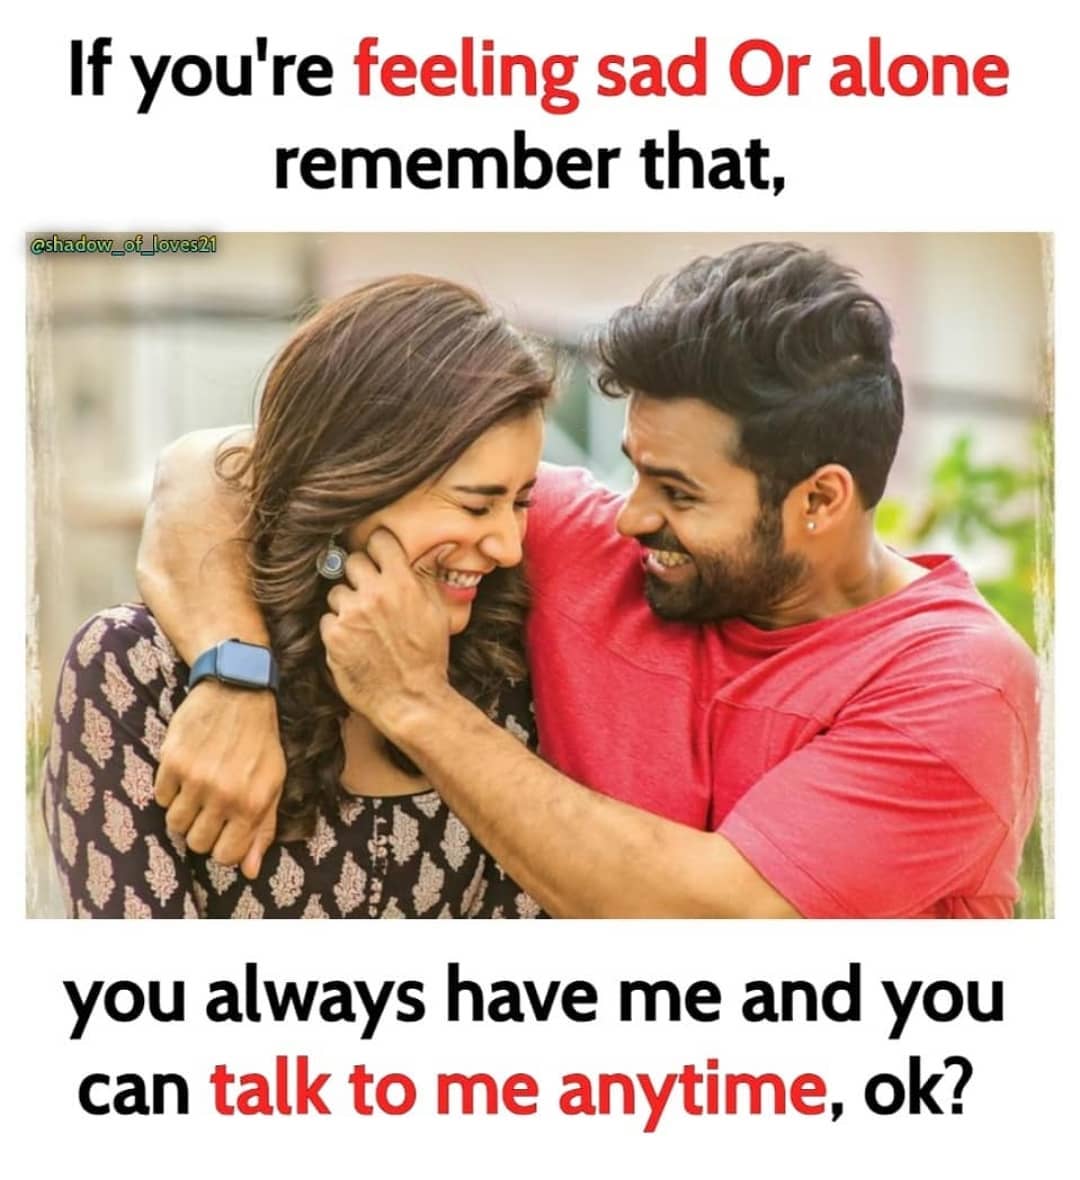 Best love quotes in english Love Captions Love